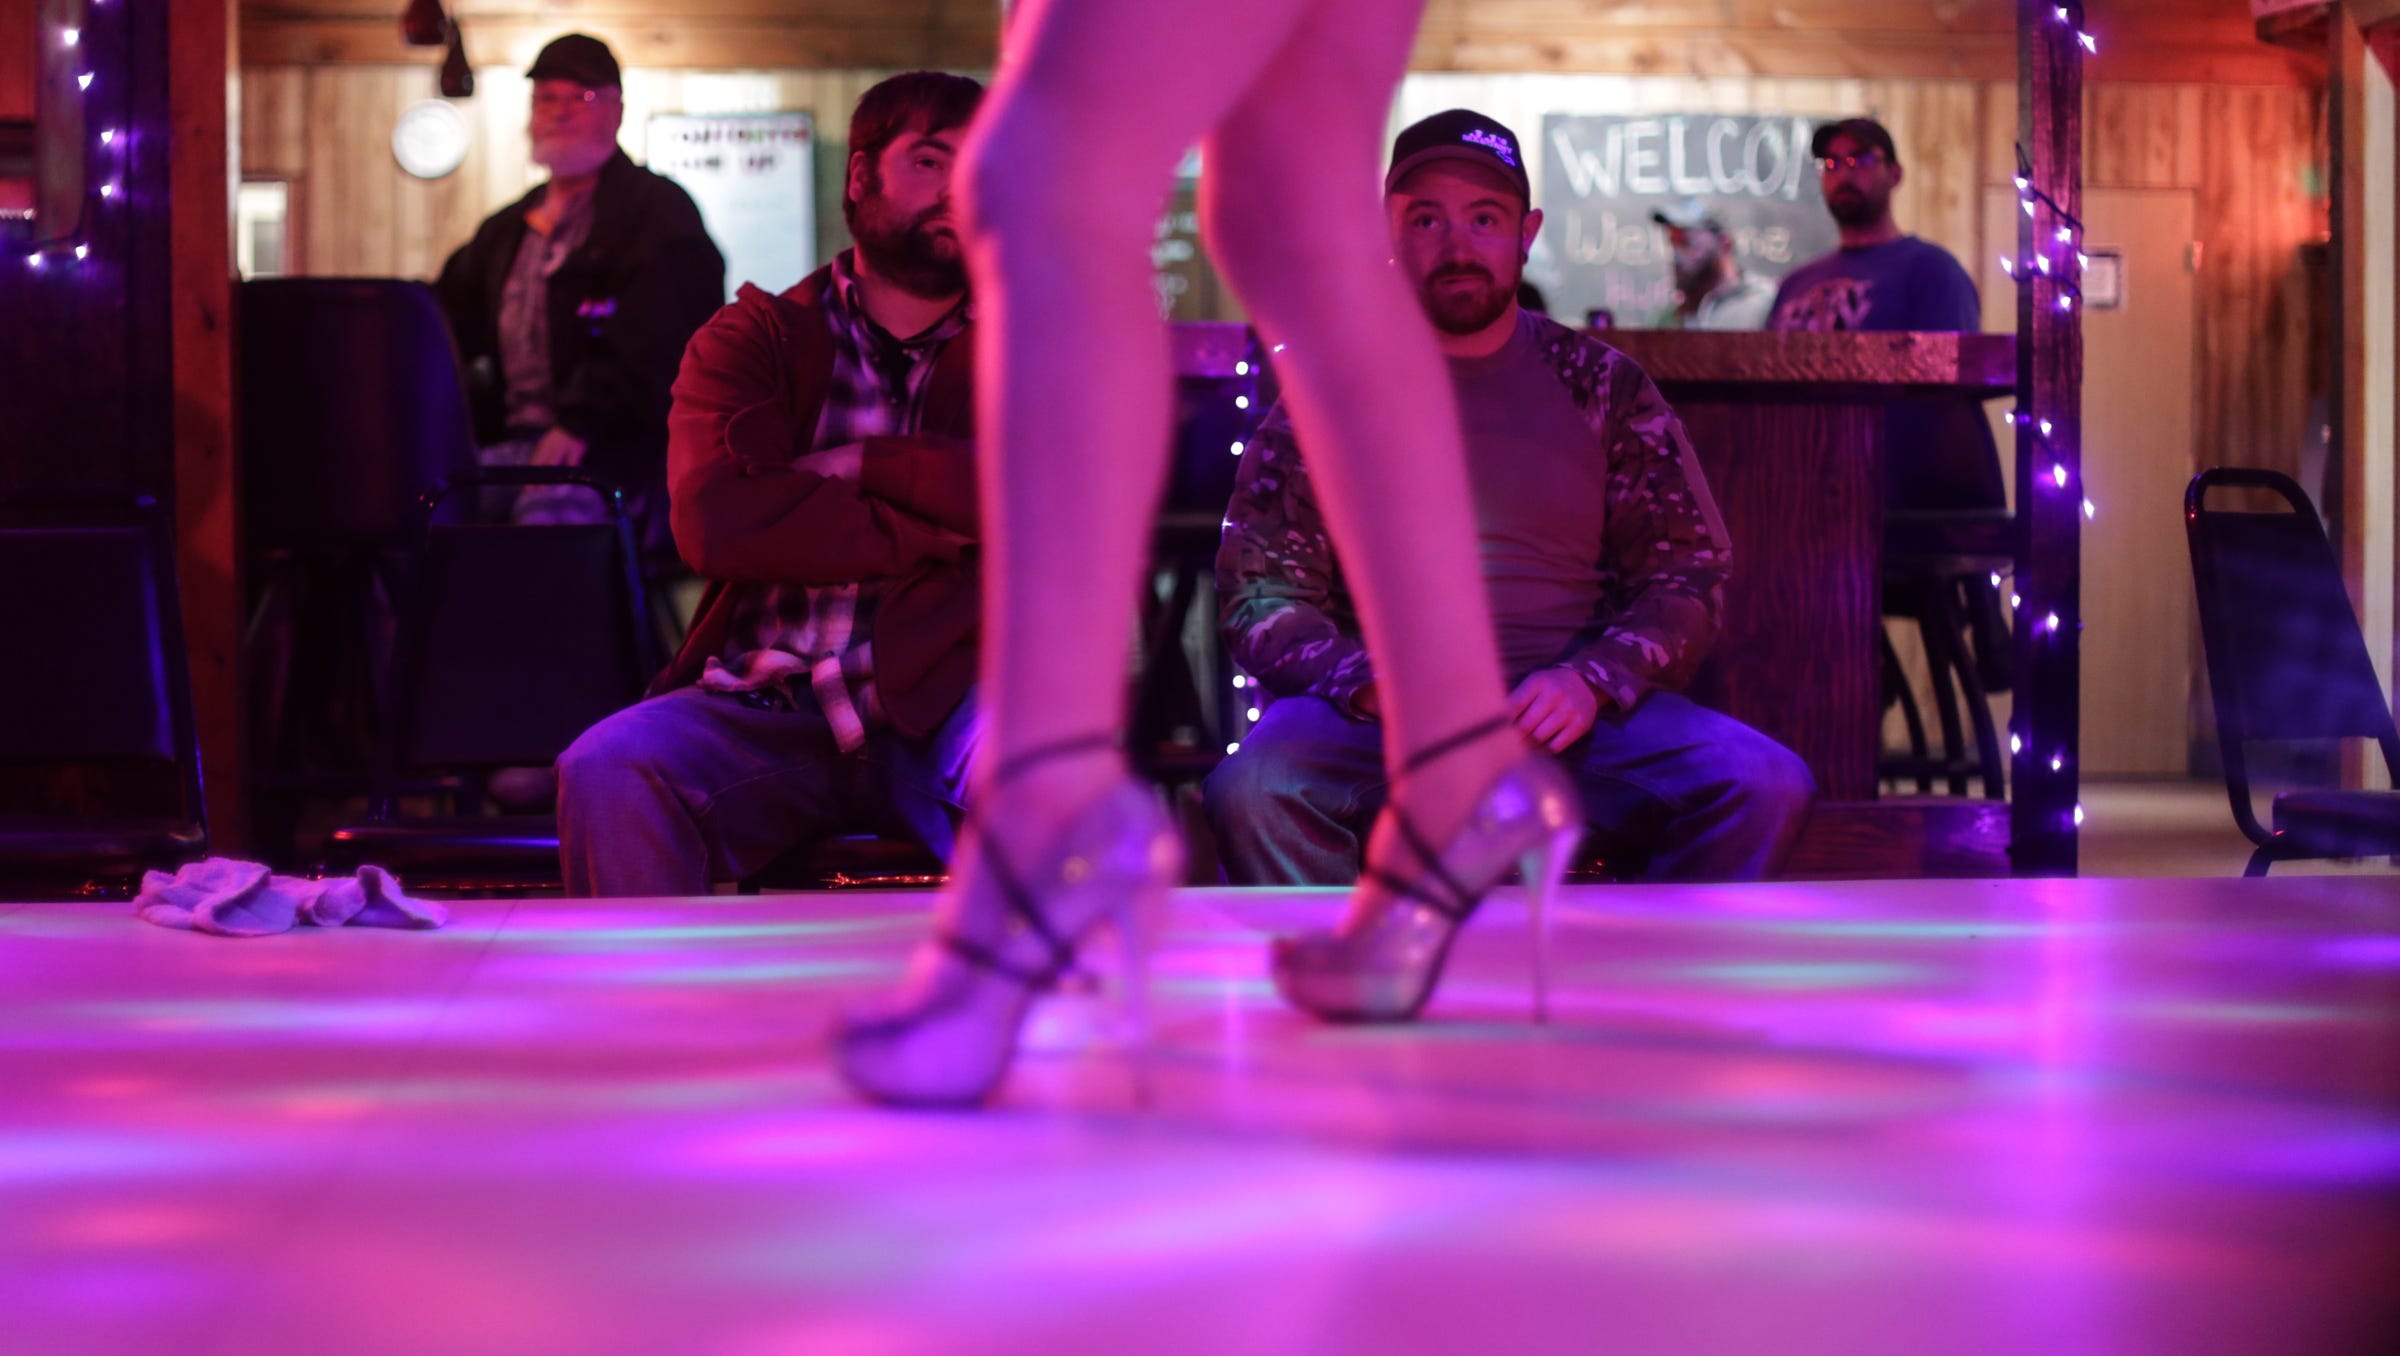 Senate Bill On Strip Clubs Adds To Sodomy Criticism 